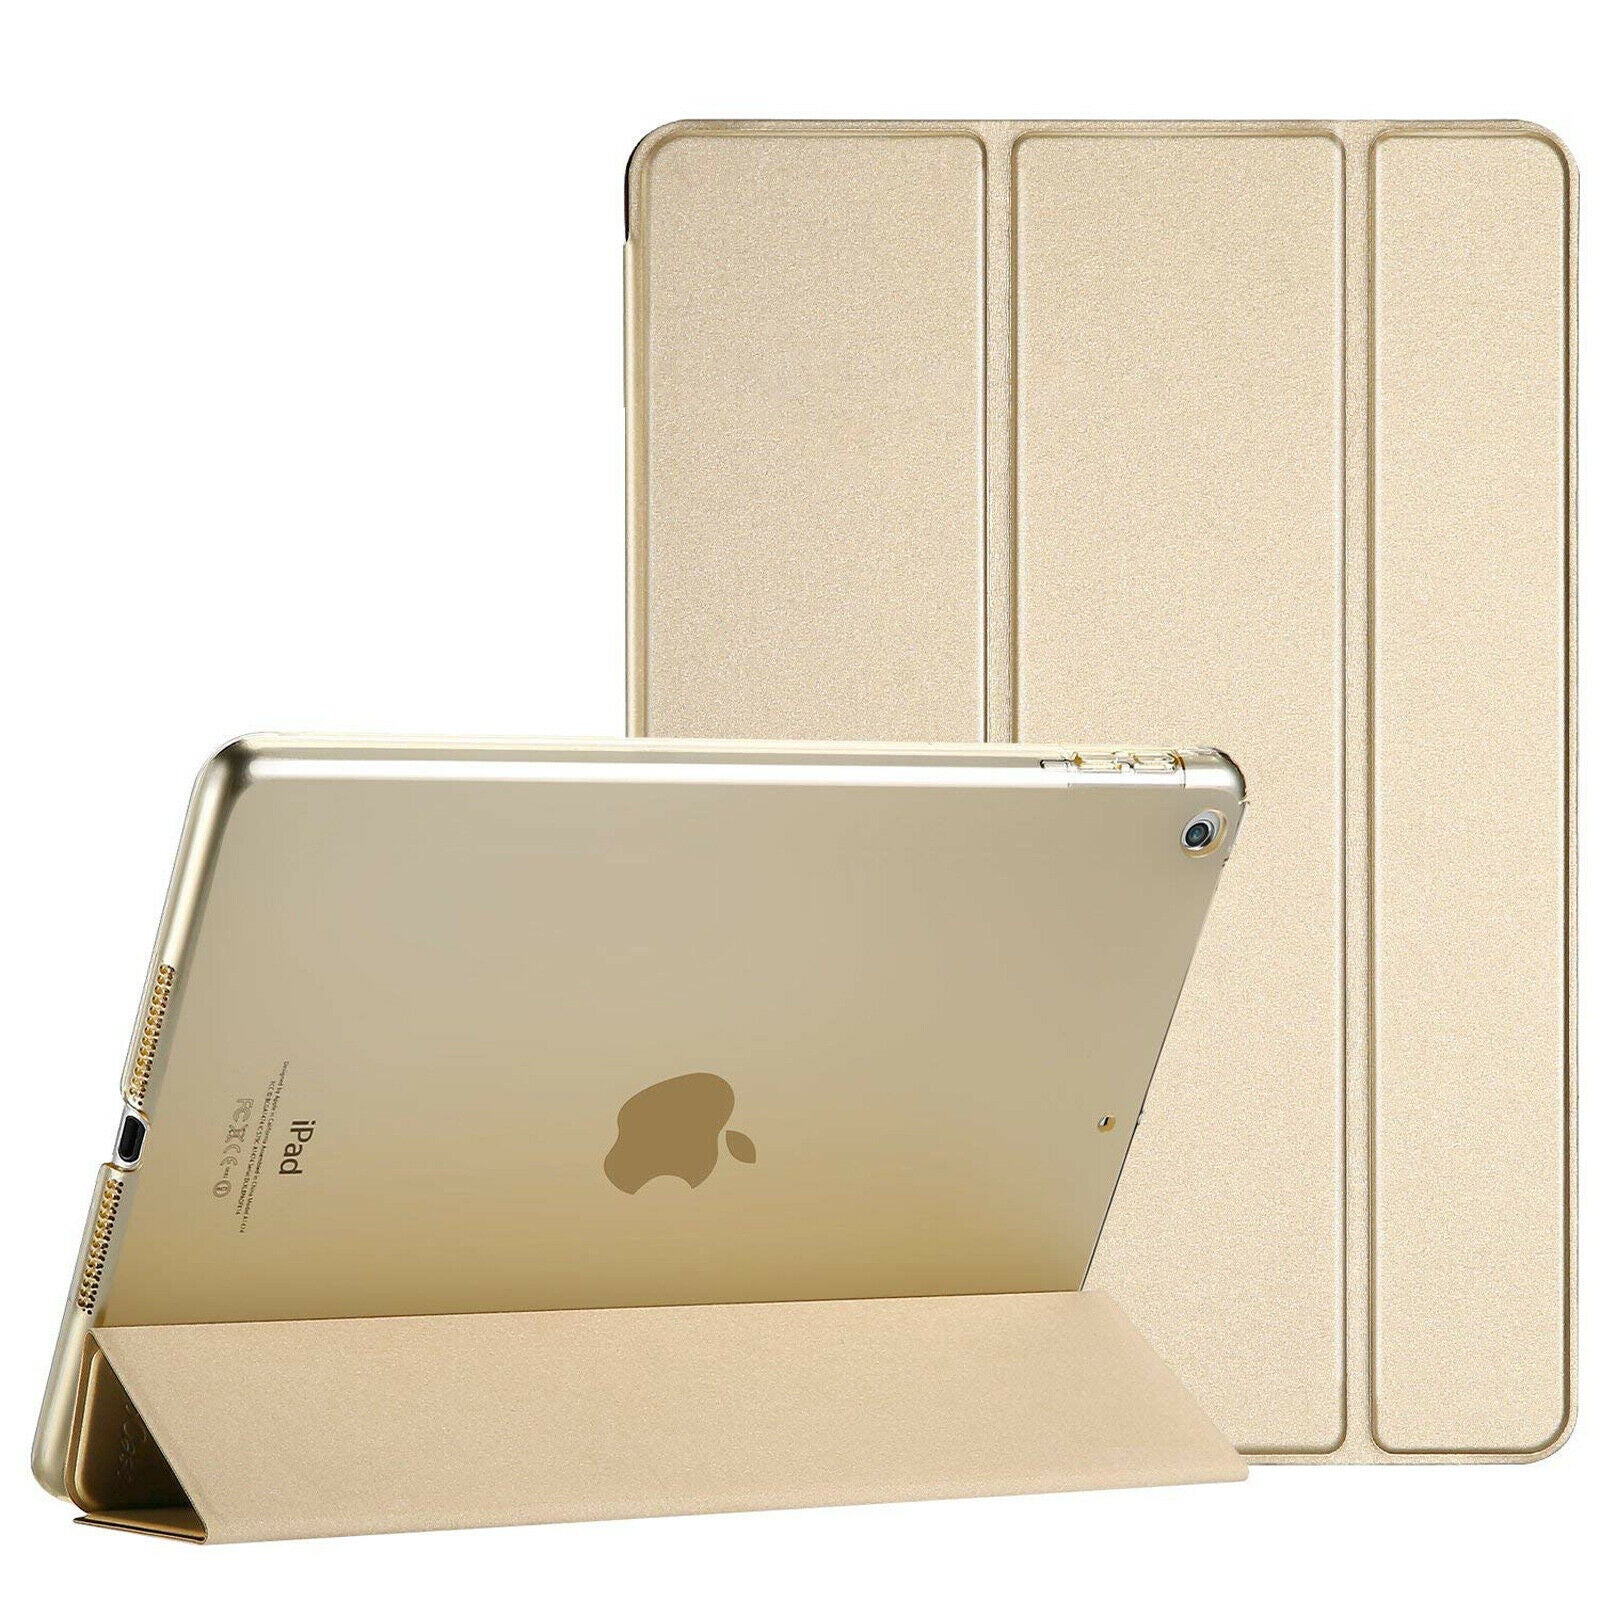 Magnetic Smart Stand Case For Apple iPad Mini 1 / 2 / 3 / 4 / 5